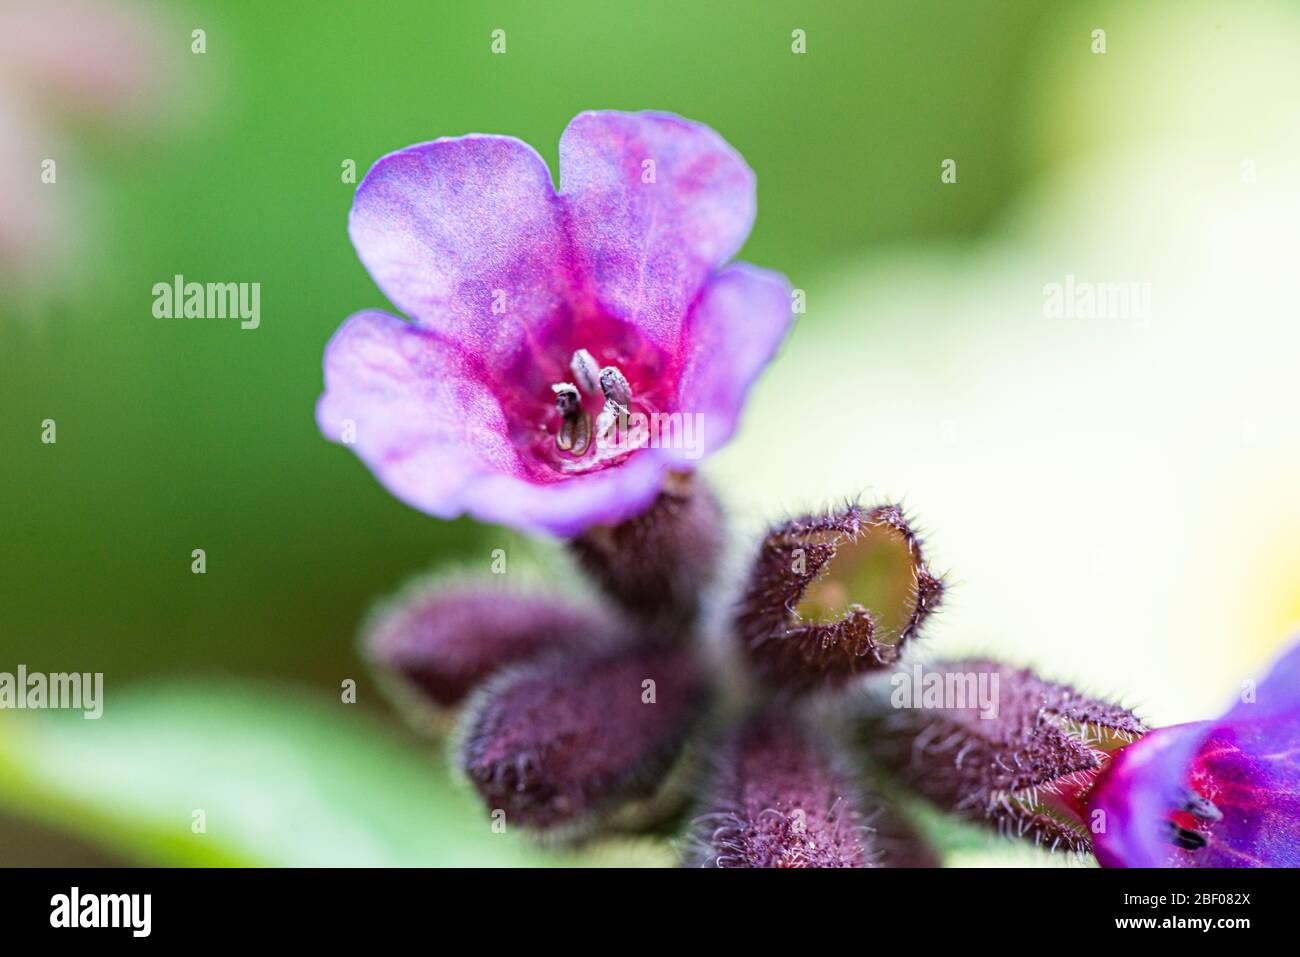 A close up of the flower of a common lungwort (Pulmonaria officinalis) Stock Photo